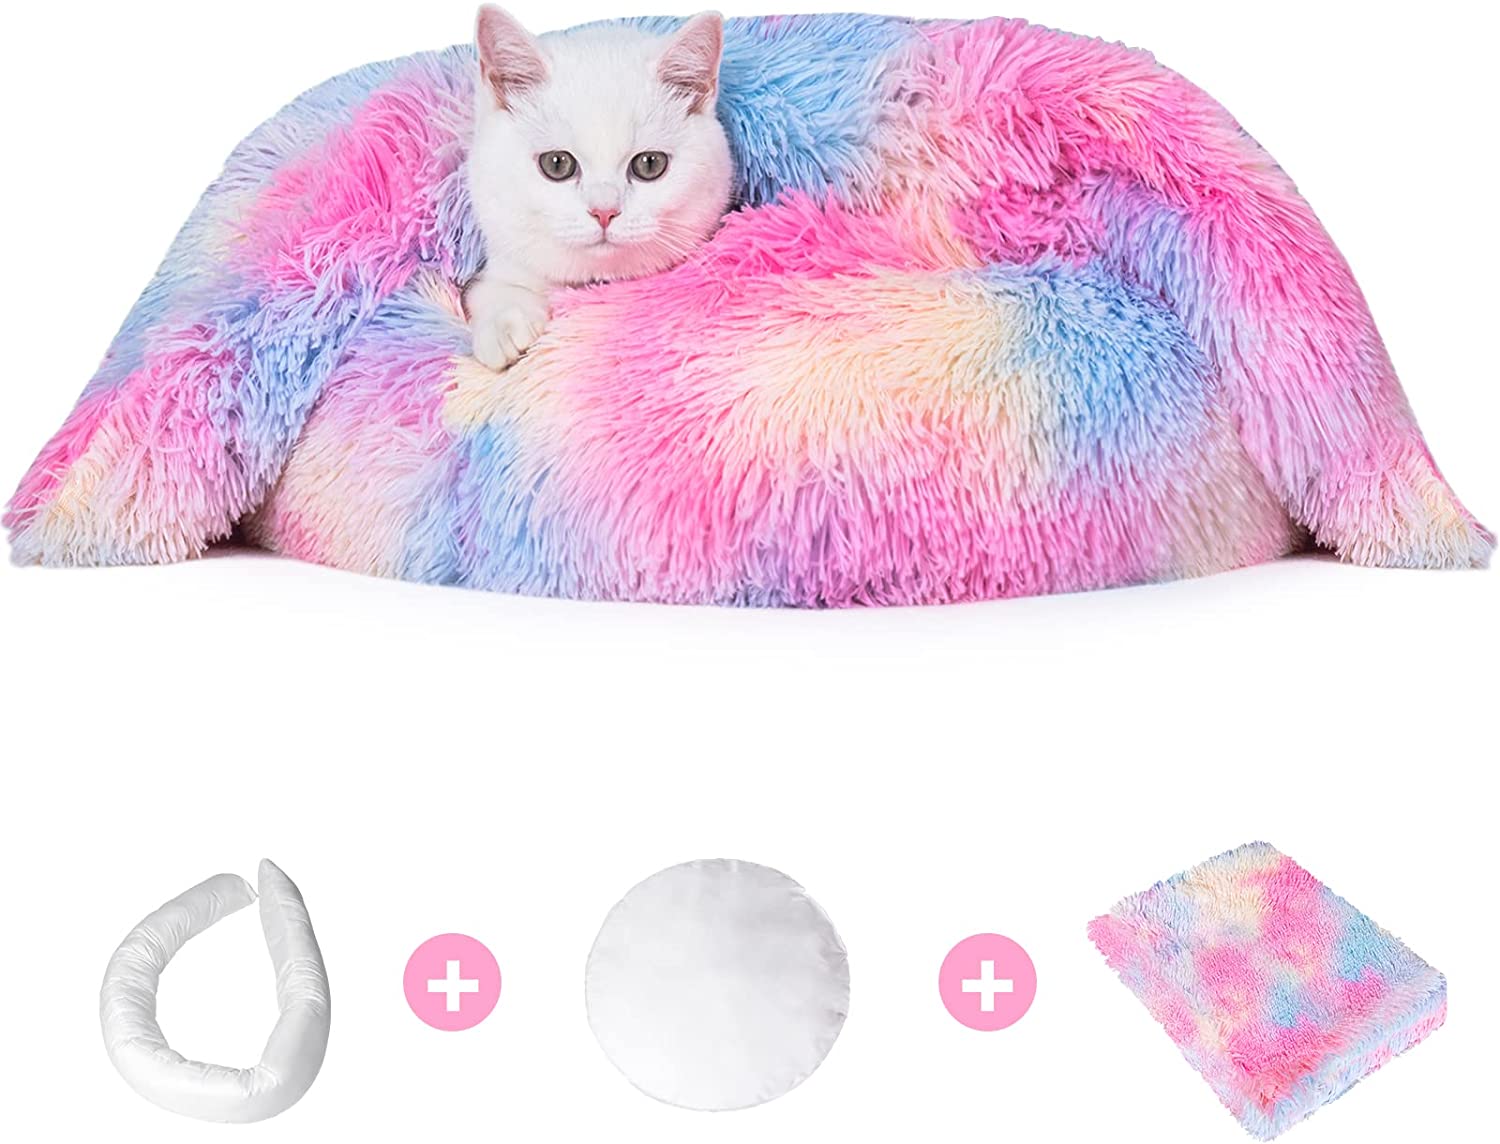 Dog Bed: Cozy-Calming, Anti-Anxiety Design (Removable Cover)